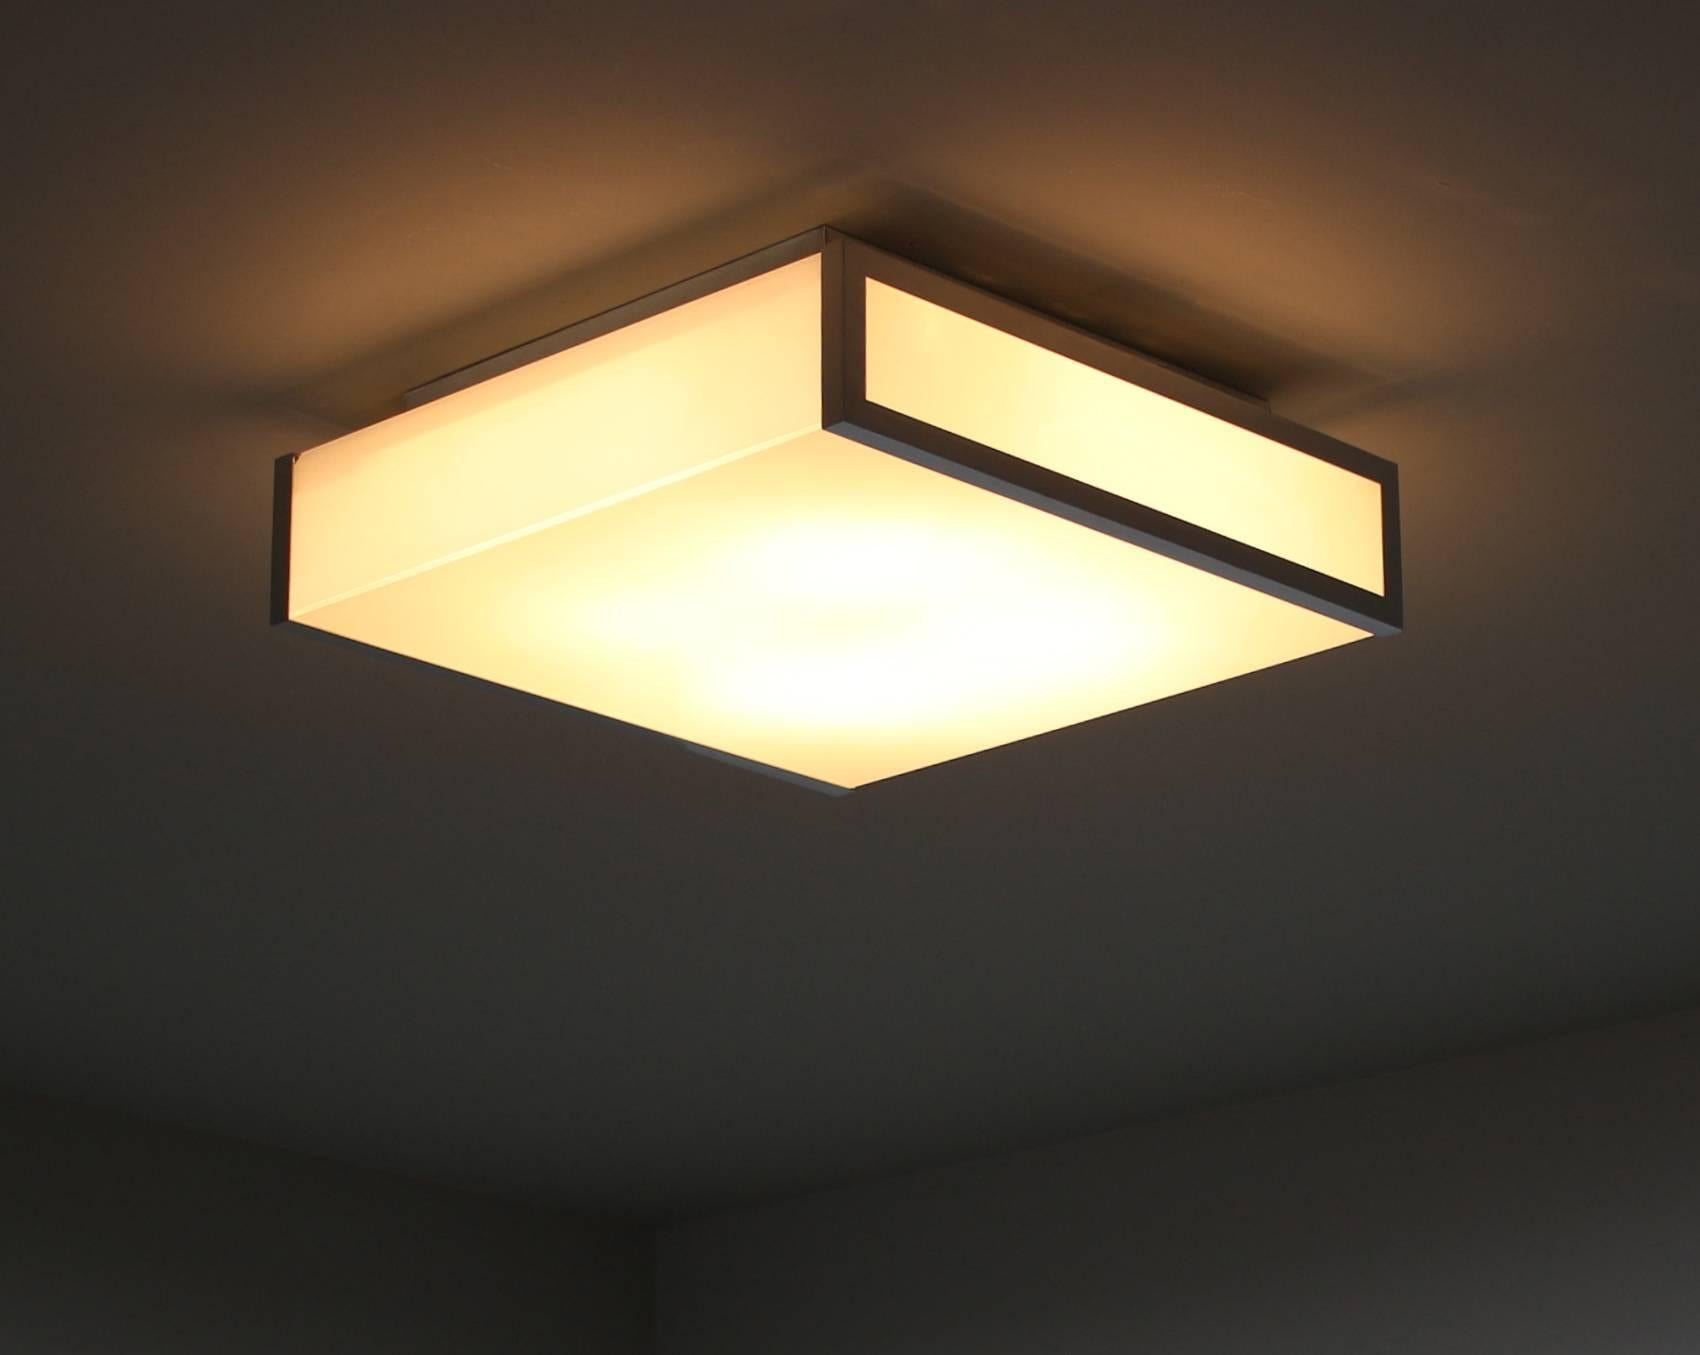 With Minimalist chromed frame that support the white enameled glass which diffuses a nice bright light.
Can be used as a ceiling or wall light.
 